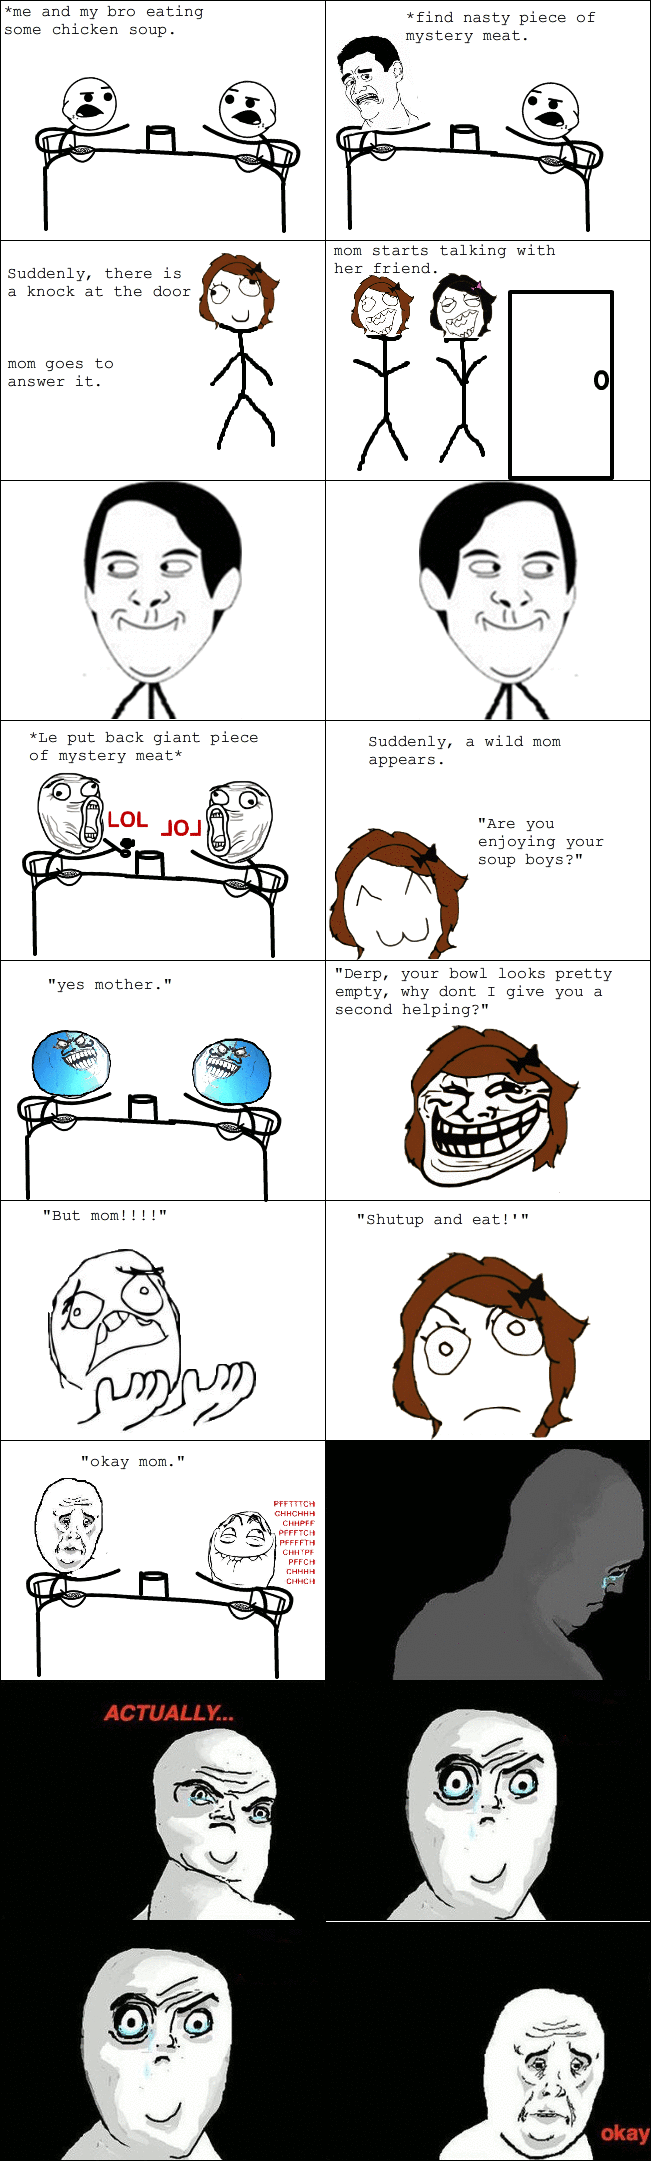 Troll mom. True story bro. me and my bre eating seme chicken seep. Suddenly, there is a kneck at the deer mem gees answer it. Le put back giant piece mystery me